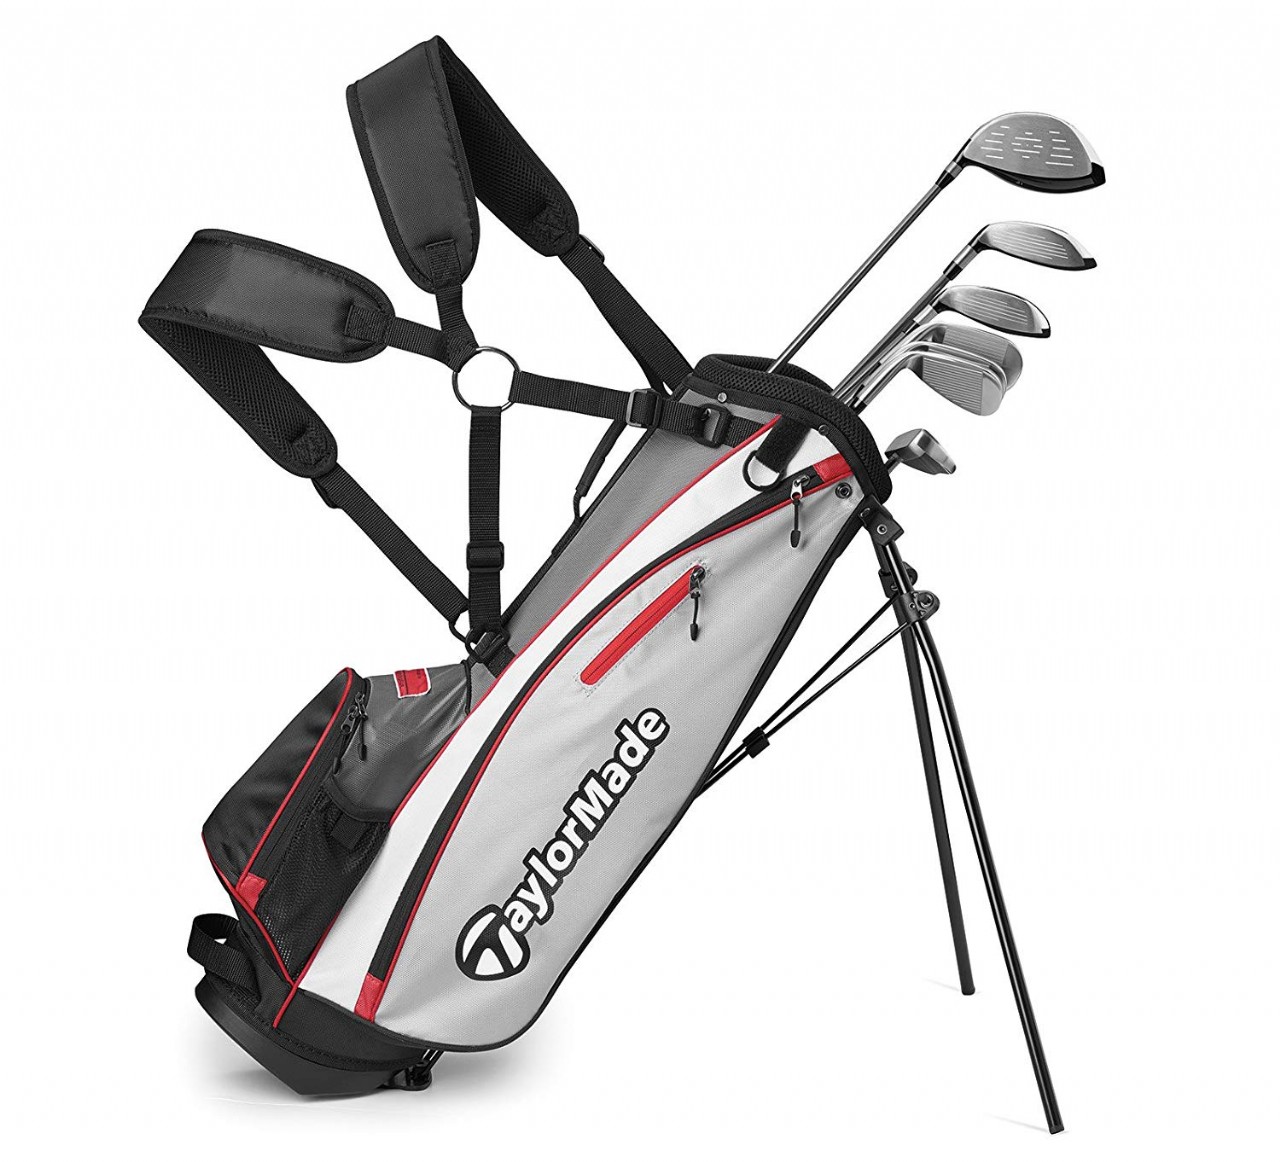 Phenom Complete Youth Golf Set with Bag